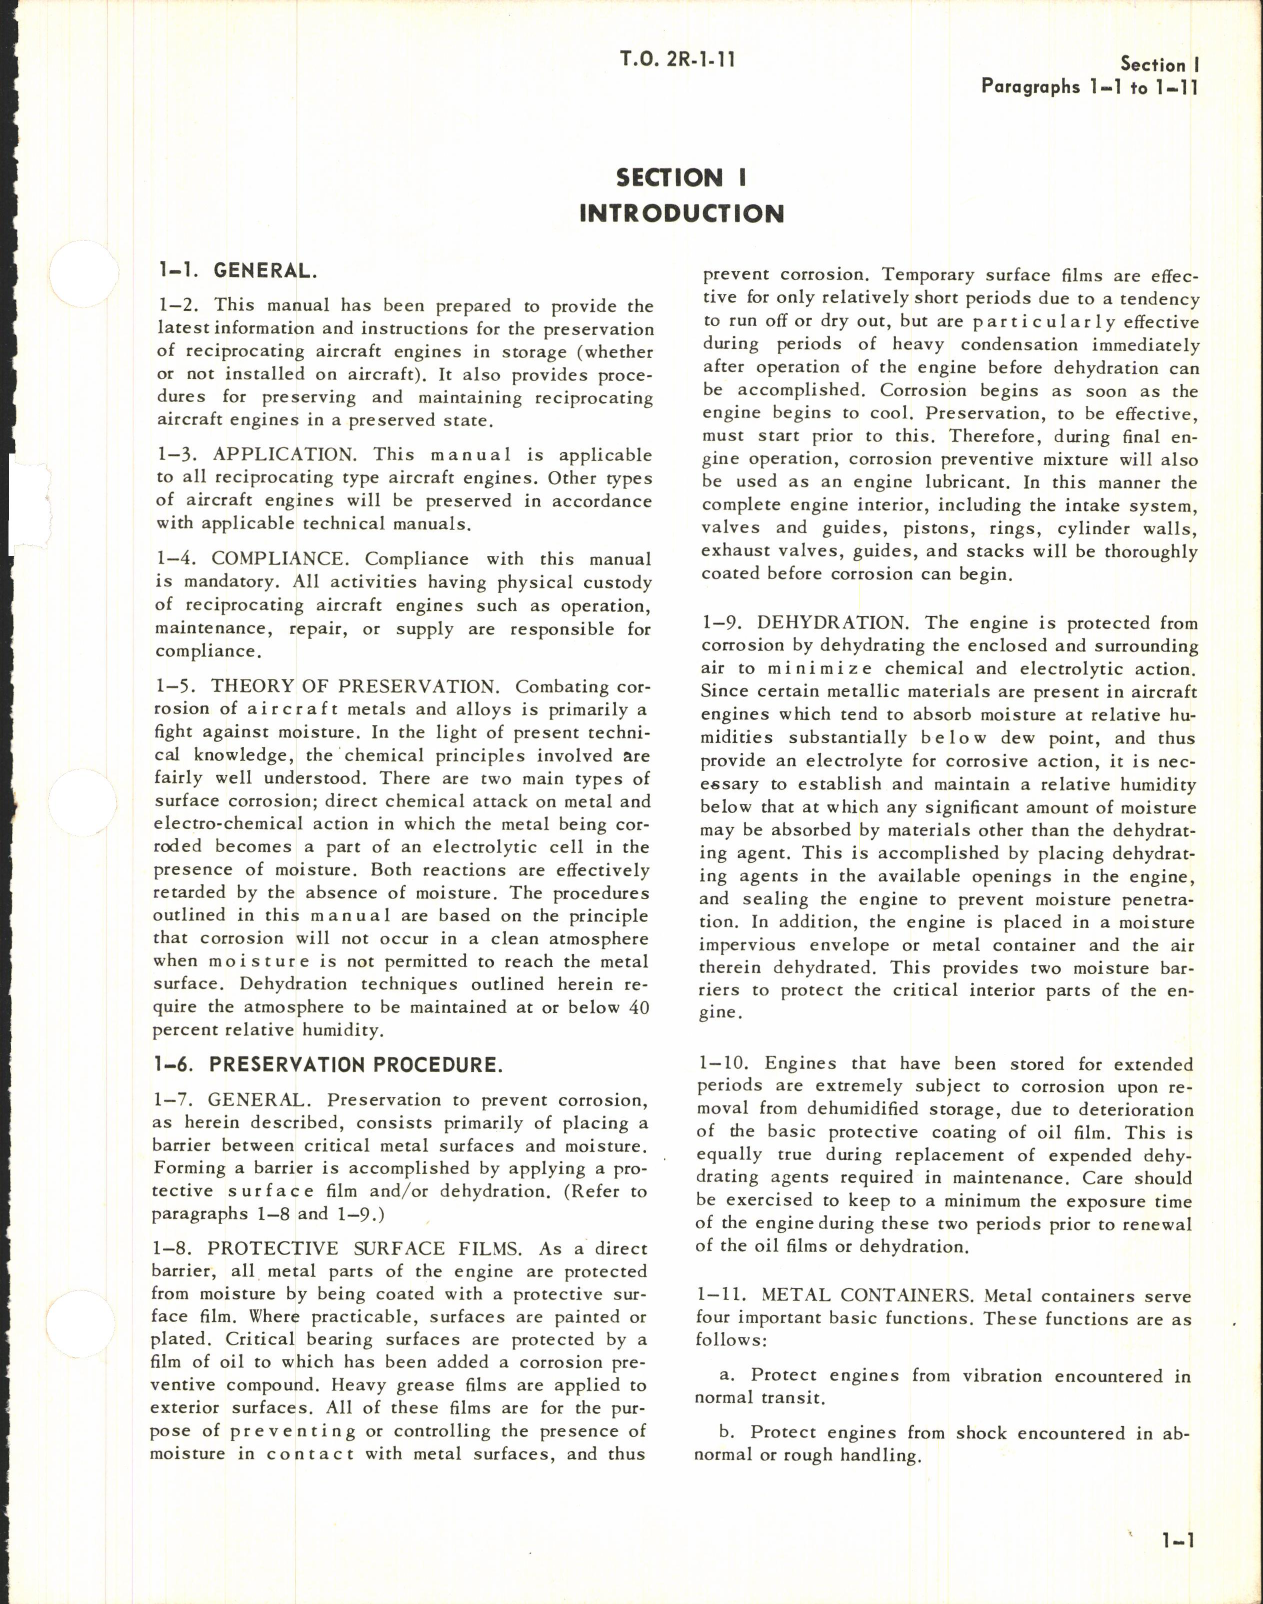 Sample page 5 from AirCorps Library document: Corrosion Control of Reciprocating Aircraft Engines